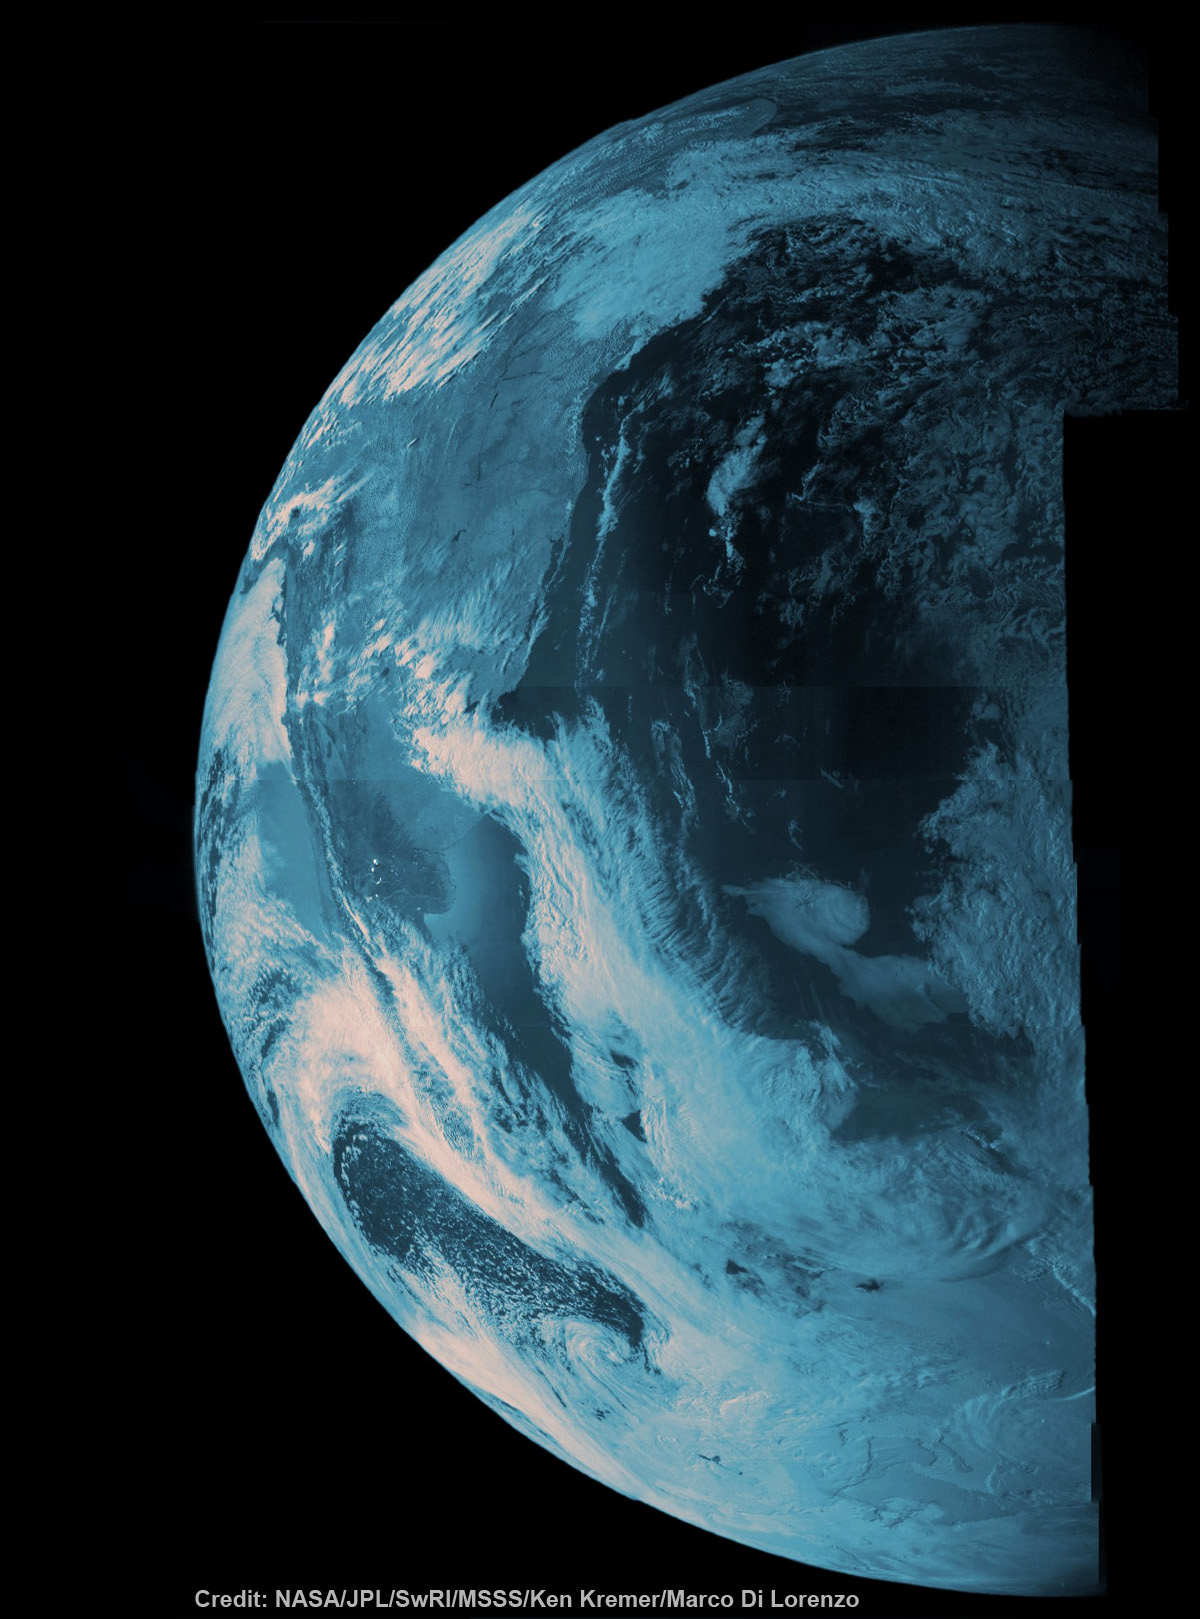 NASA's Juno probe captured the image data for this composite picture during its Earth flyby on Oct. 9 over Argentina,  South America and the southern Atlantic Ocean. Raw imagery was reconstructed and aligned by Ken Kremer and Marco Di Lorenzo, and false-color blue has been added to the view taken by a near-infrared filter that is typically used to detect methane. Credit: NASA/JPL/SwRI/MSSS/Ken Kremer/Marco Di Lorenzo